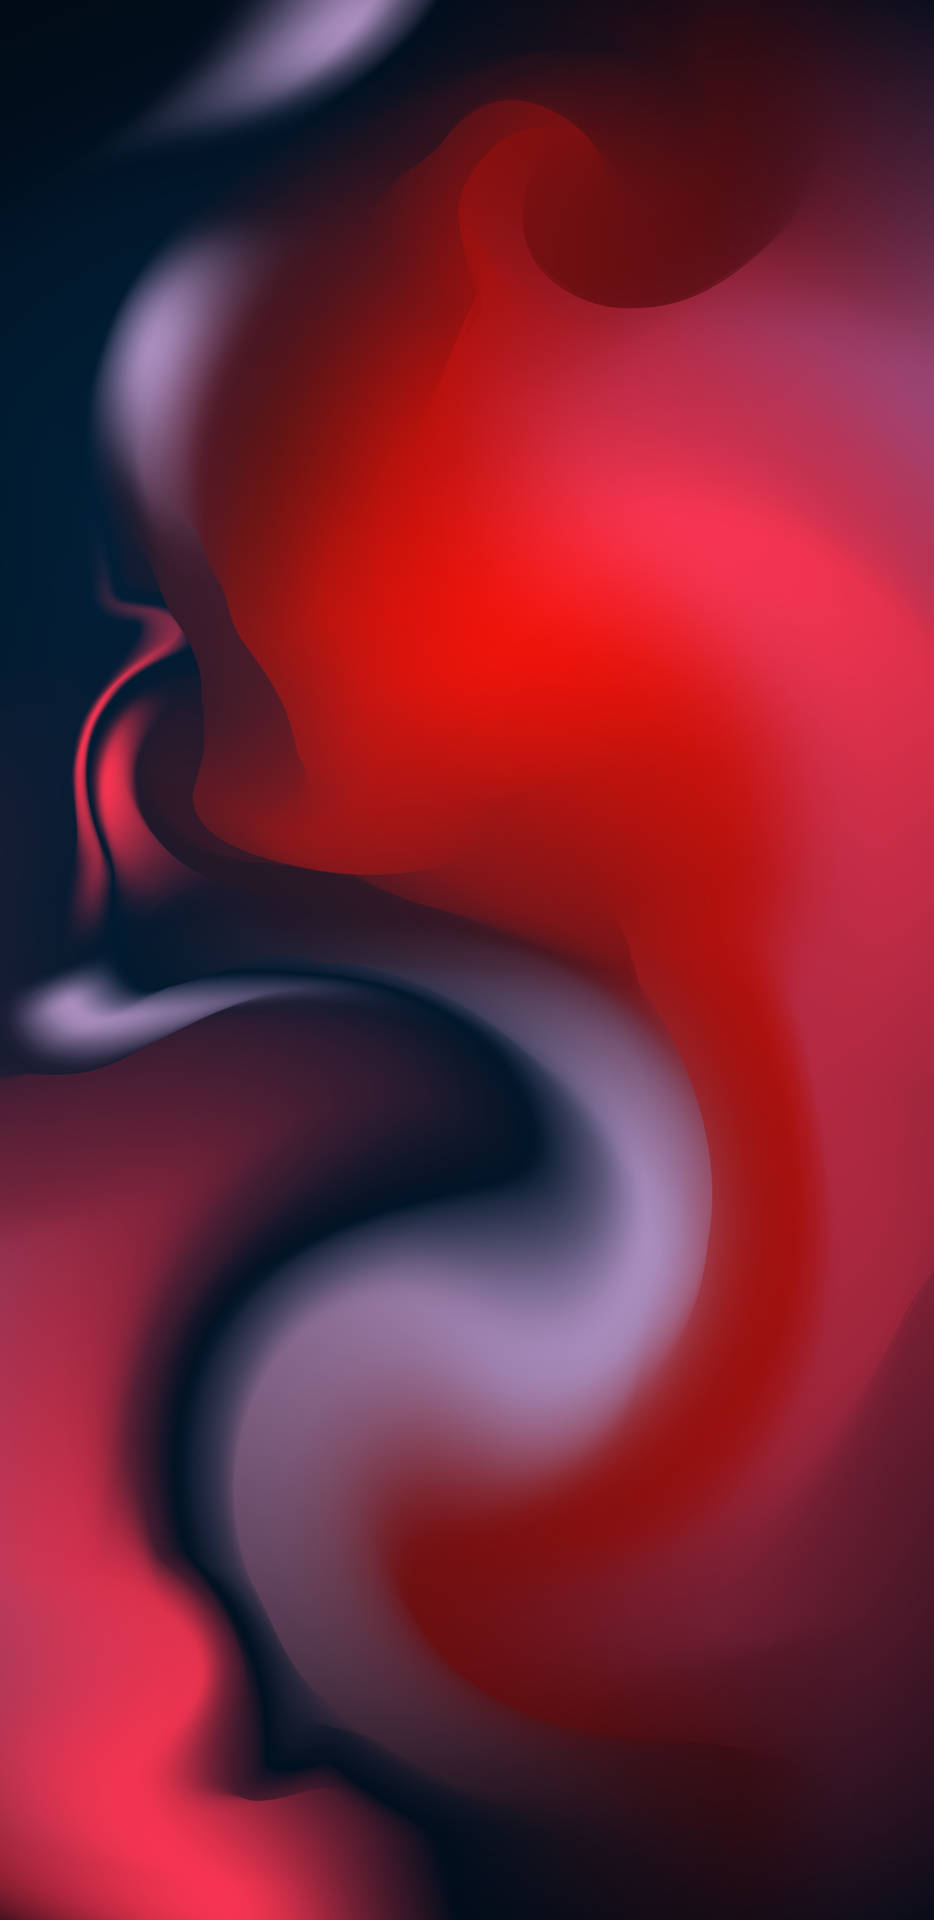 Abstract Iphone 11 Pro Red Background